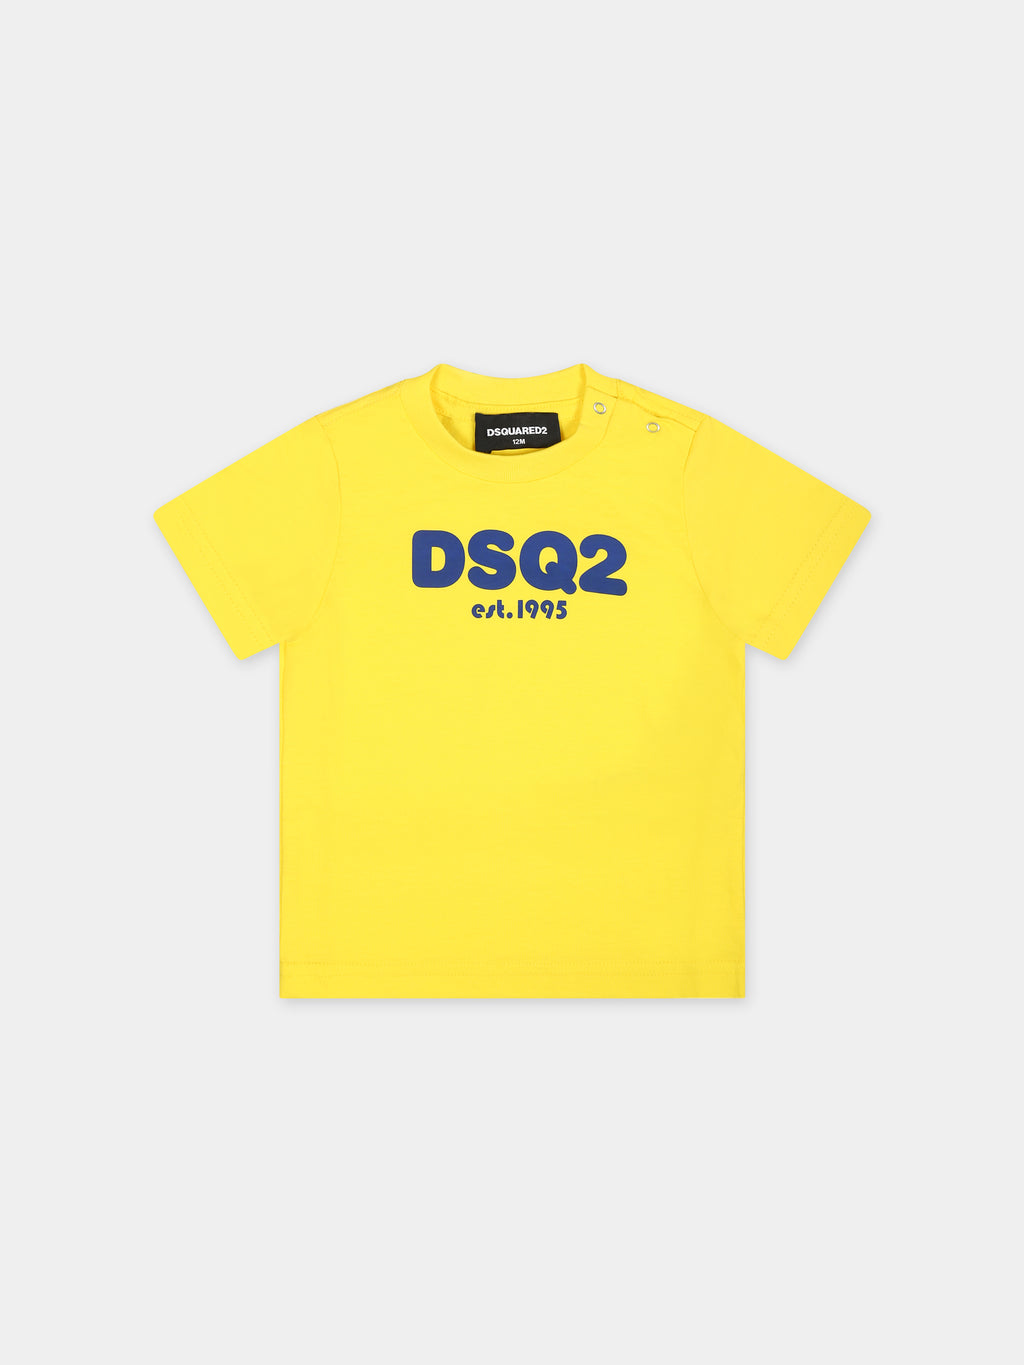 Yellow t-shirt for baby boy with logo